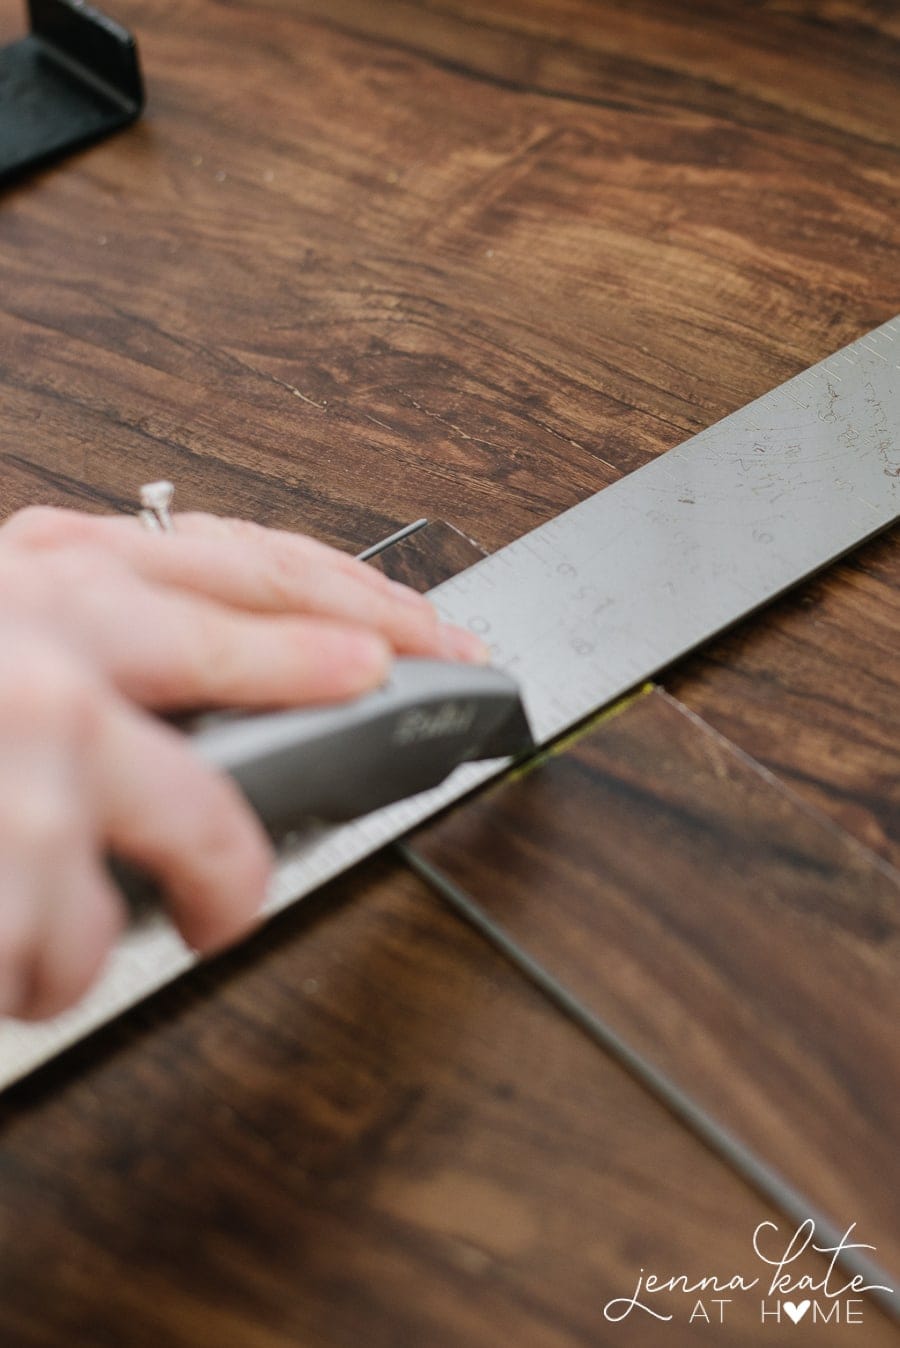 Using a box cutter to cut vinyl planks